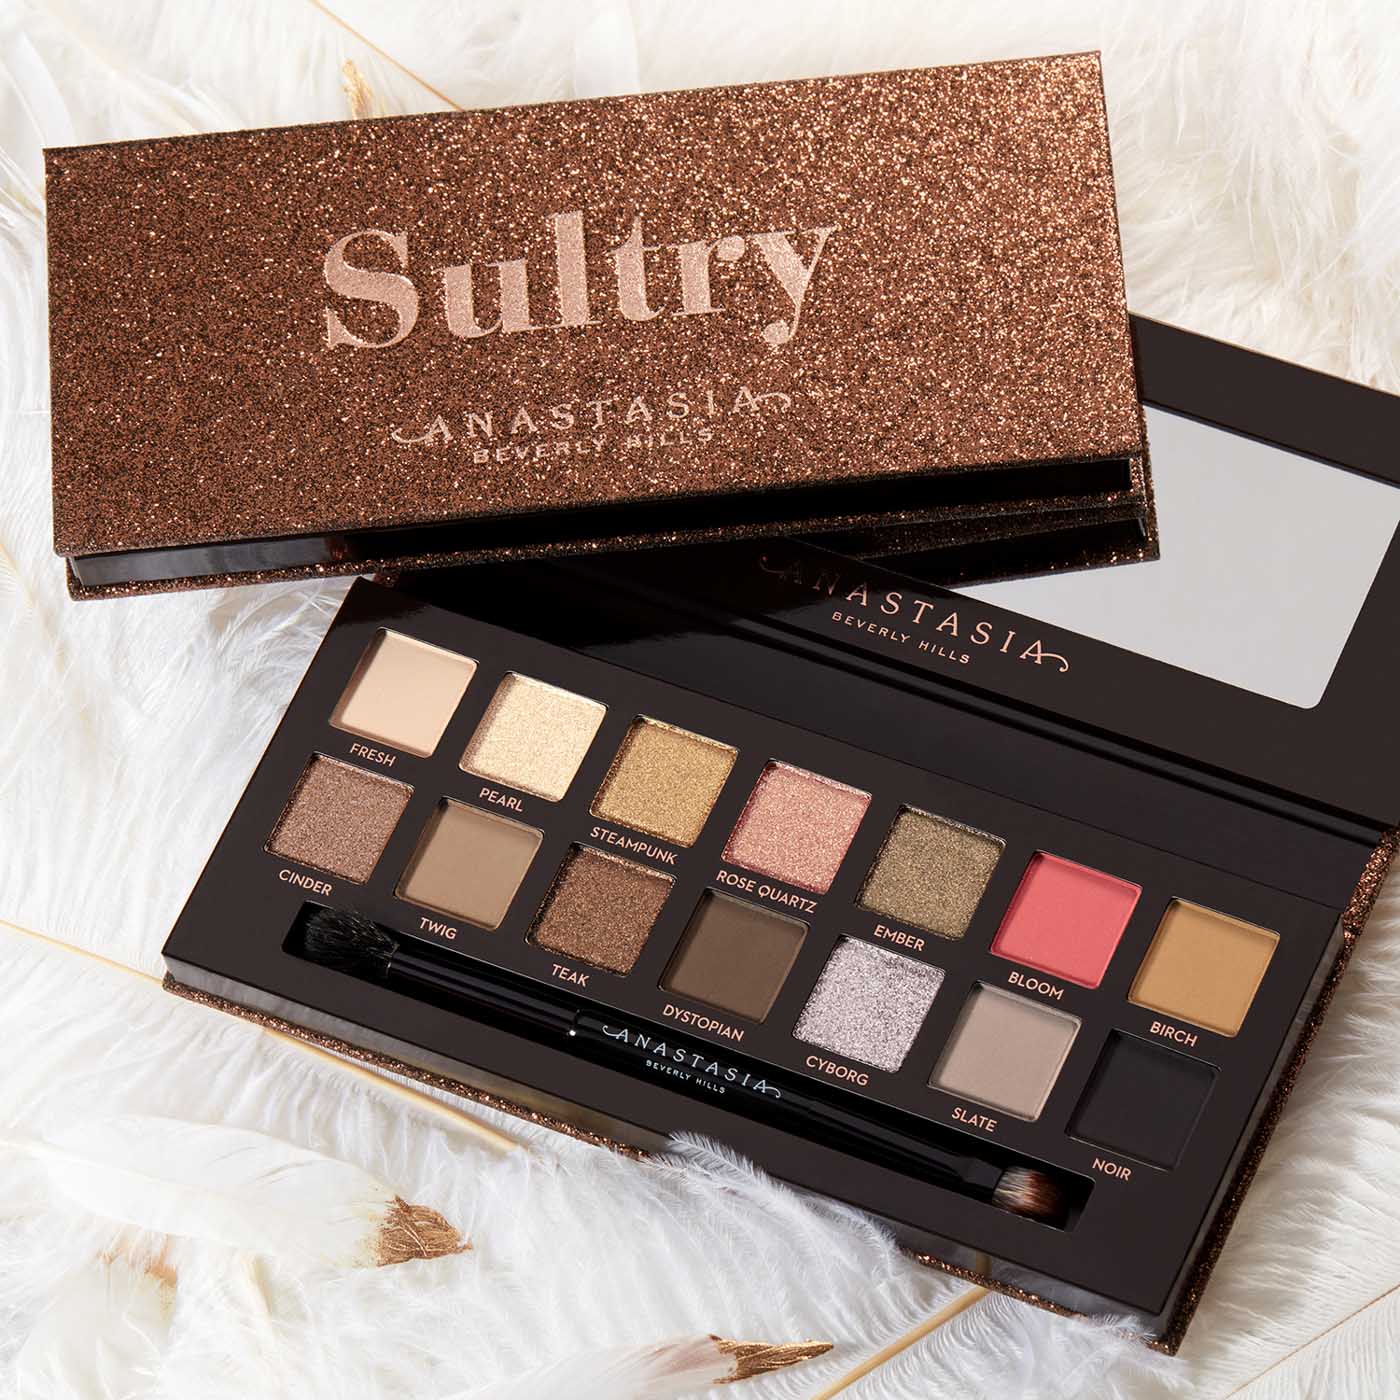 SULTRY. Photo courtesy of Rustan's Beauty 